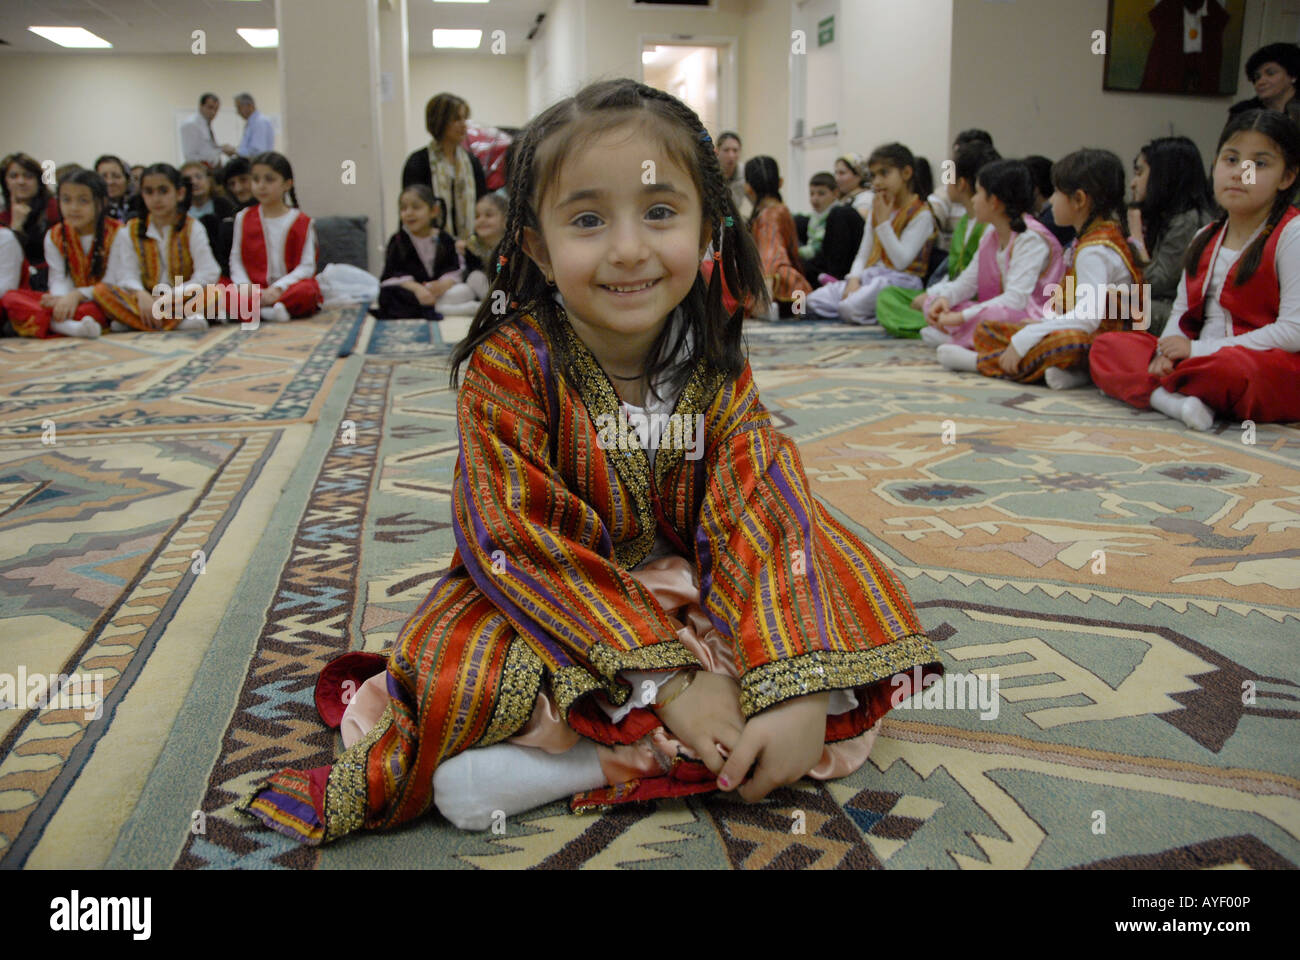 INFANT ALEVI GIRL IN TRADITIONAL DRESS Stock Photo